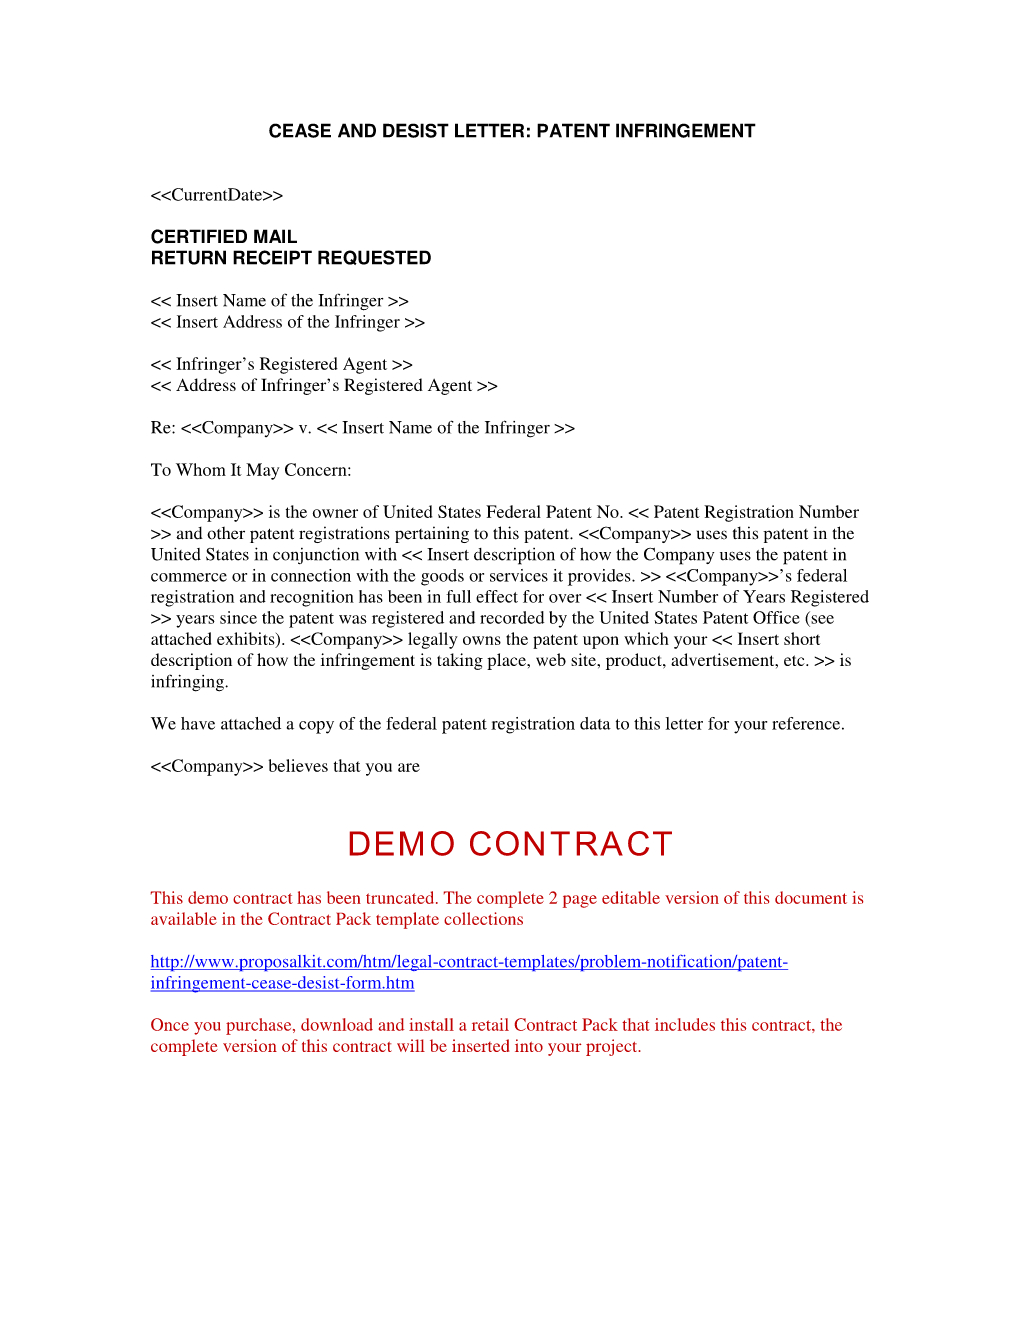 Cease and Desist Letter Trademark Infringement Template - Fresh Cease and Desist Template Your Template Collection